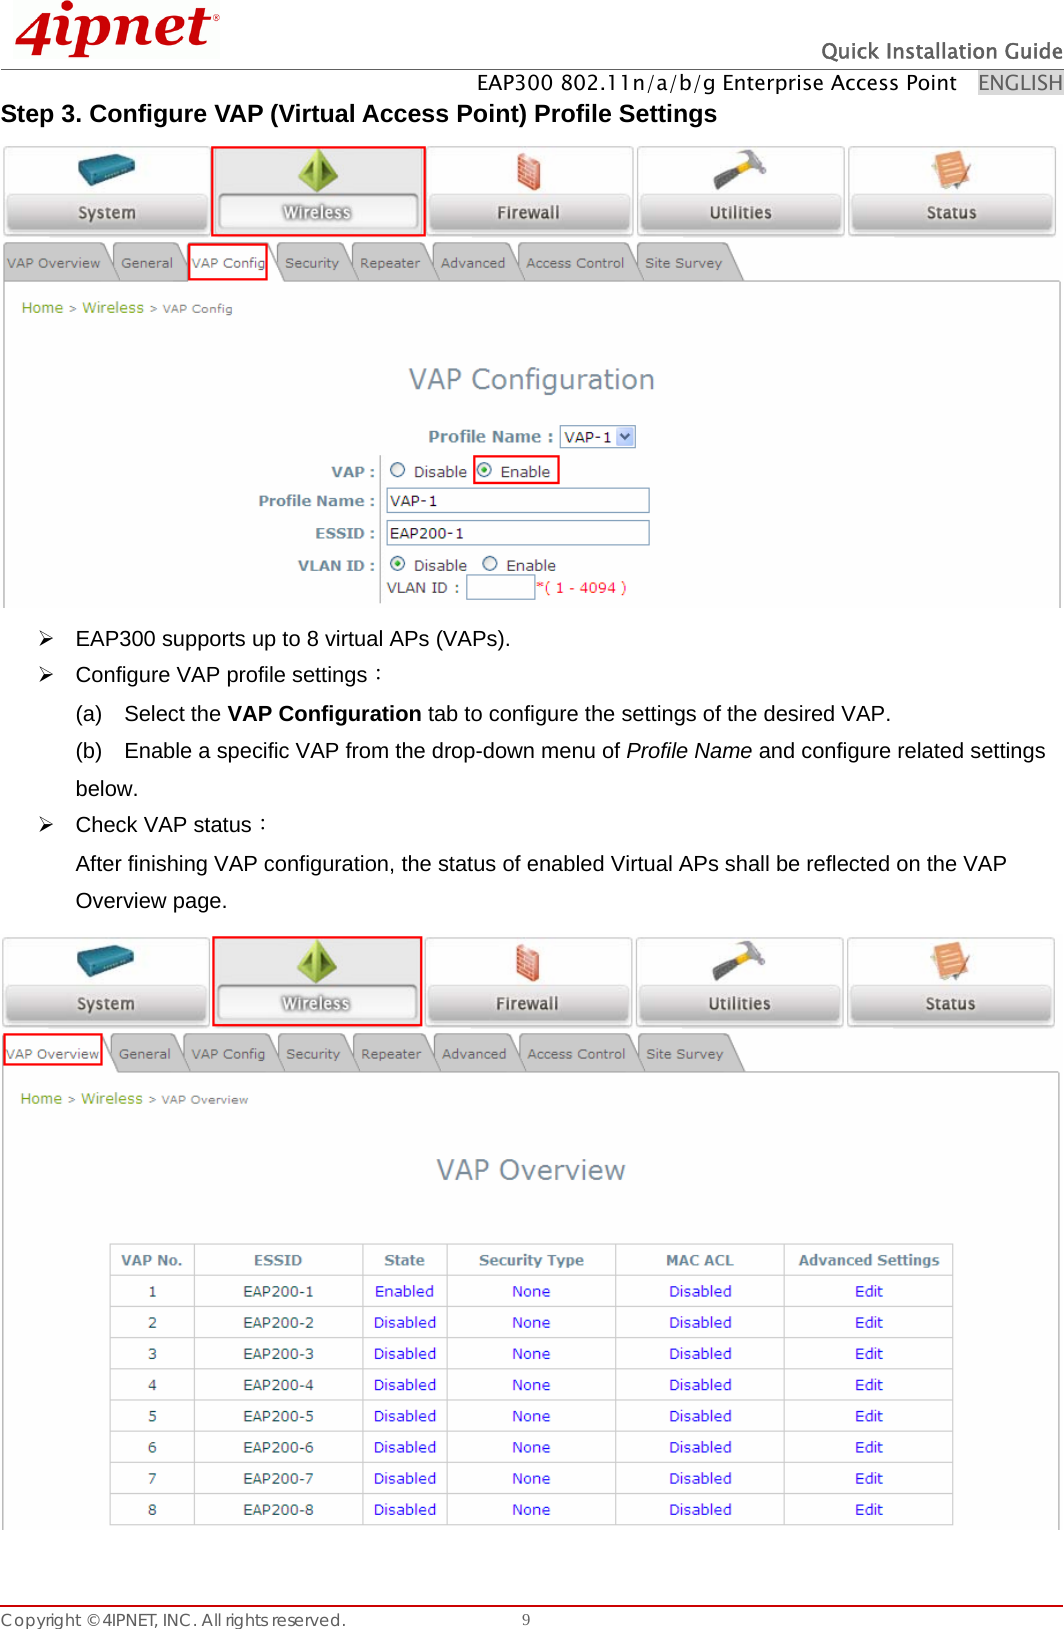  Quick Installation Guide EAP300 802.11n/a/b/g Enterprise Access Point    ENGLISH Copyright © 4IPNET, INC. All rights reserved.    9Step 3. Configure VAP (Virtual Access Point) Profile Settings  ¾  EAP300 supports up to 8 virtual APs (VAPs).   ¾  Configure VAP profile settings： (a)  Select the VAP Configuration tab to configure the settings of the desired VAP.   (b)    Enable a specific VAP from the drop-down menu of Profile Name and configure related settings below. ¾ Check VAP status： After finishing VAP configuration, the status of enabled Virtual APs shall be reflected on the VAP Overview page.    